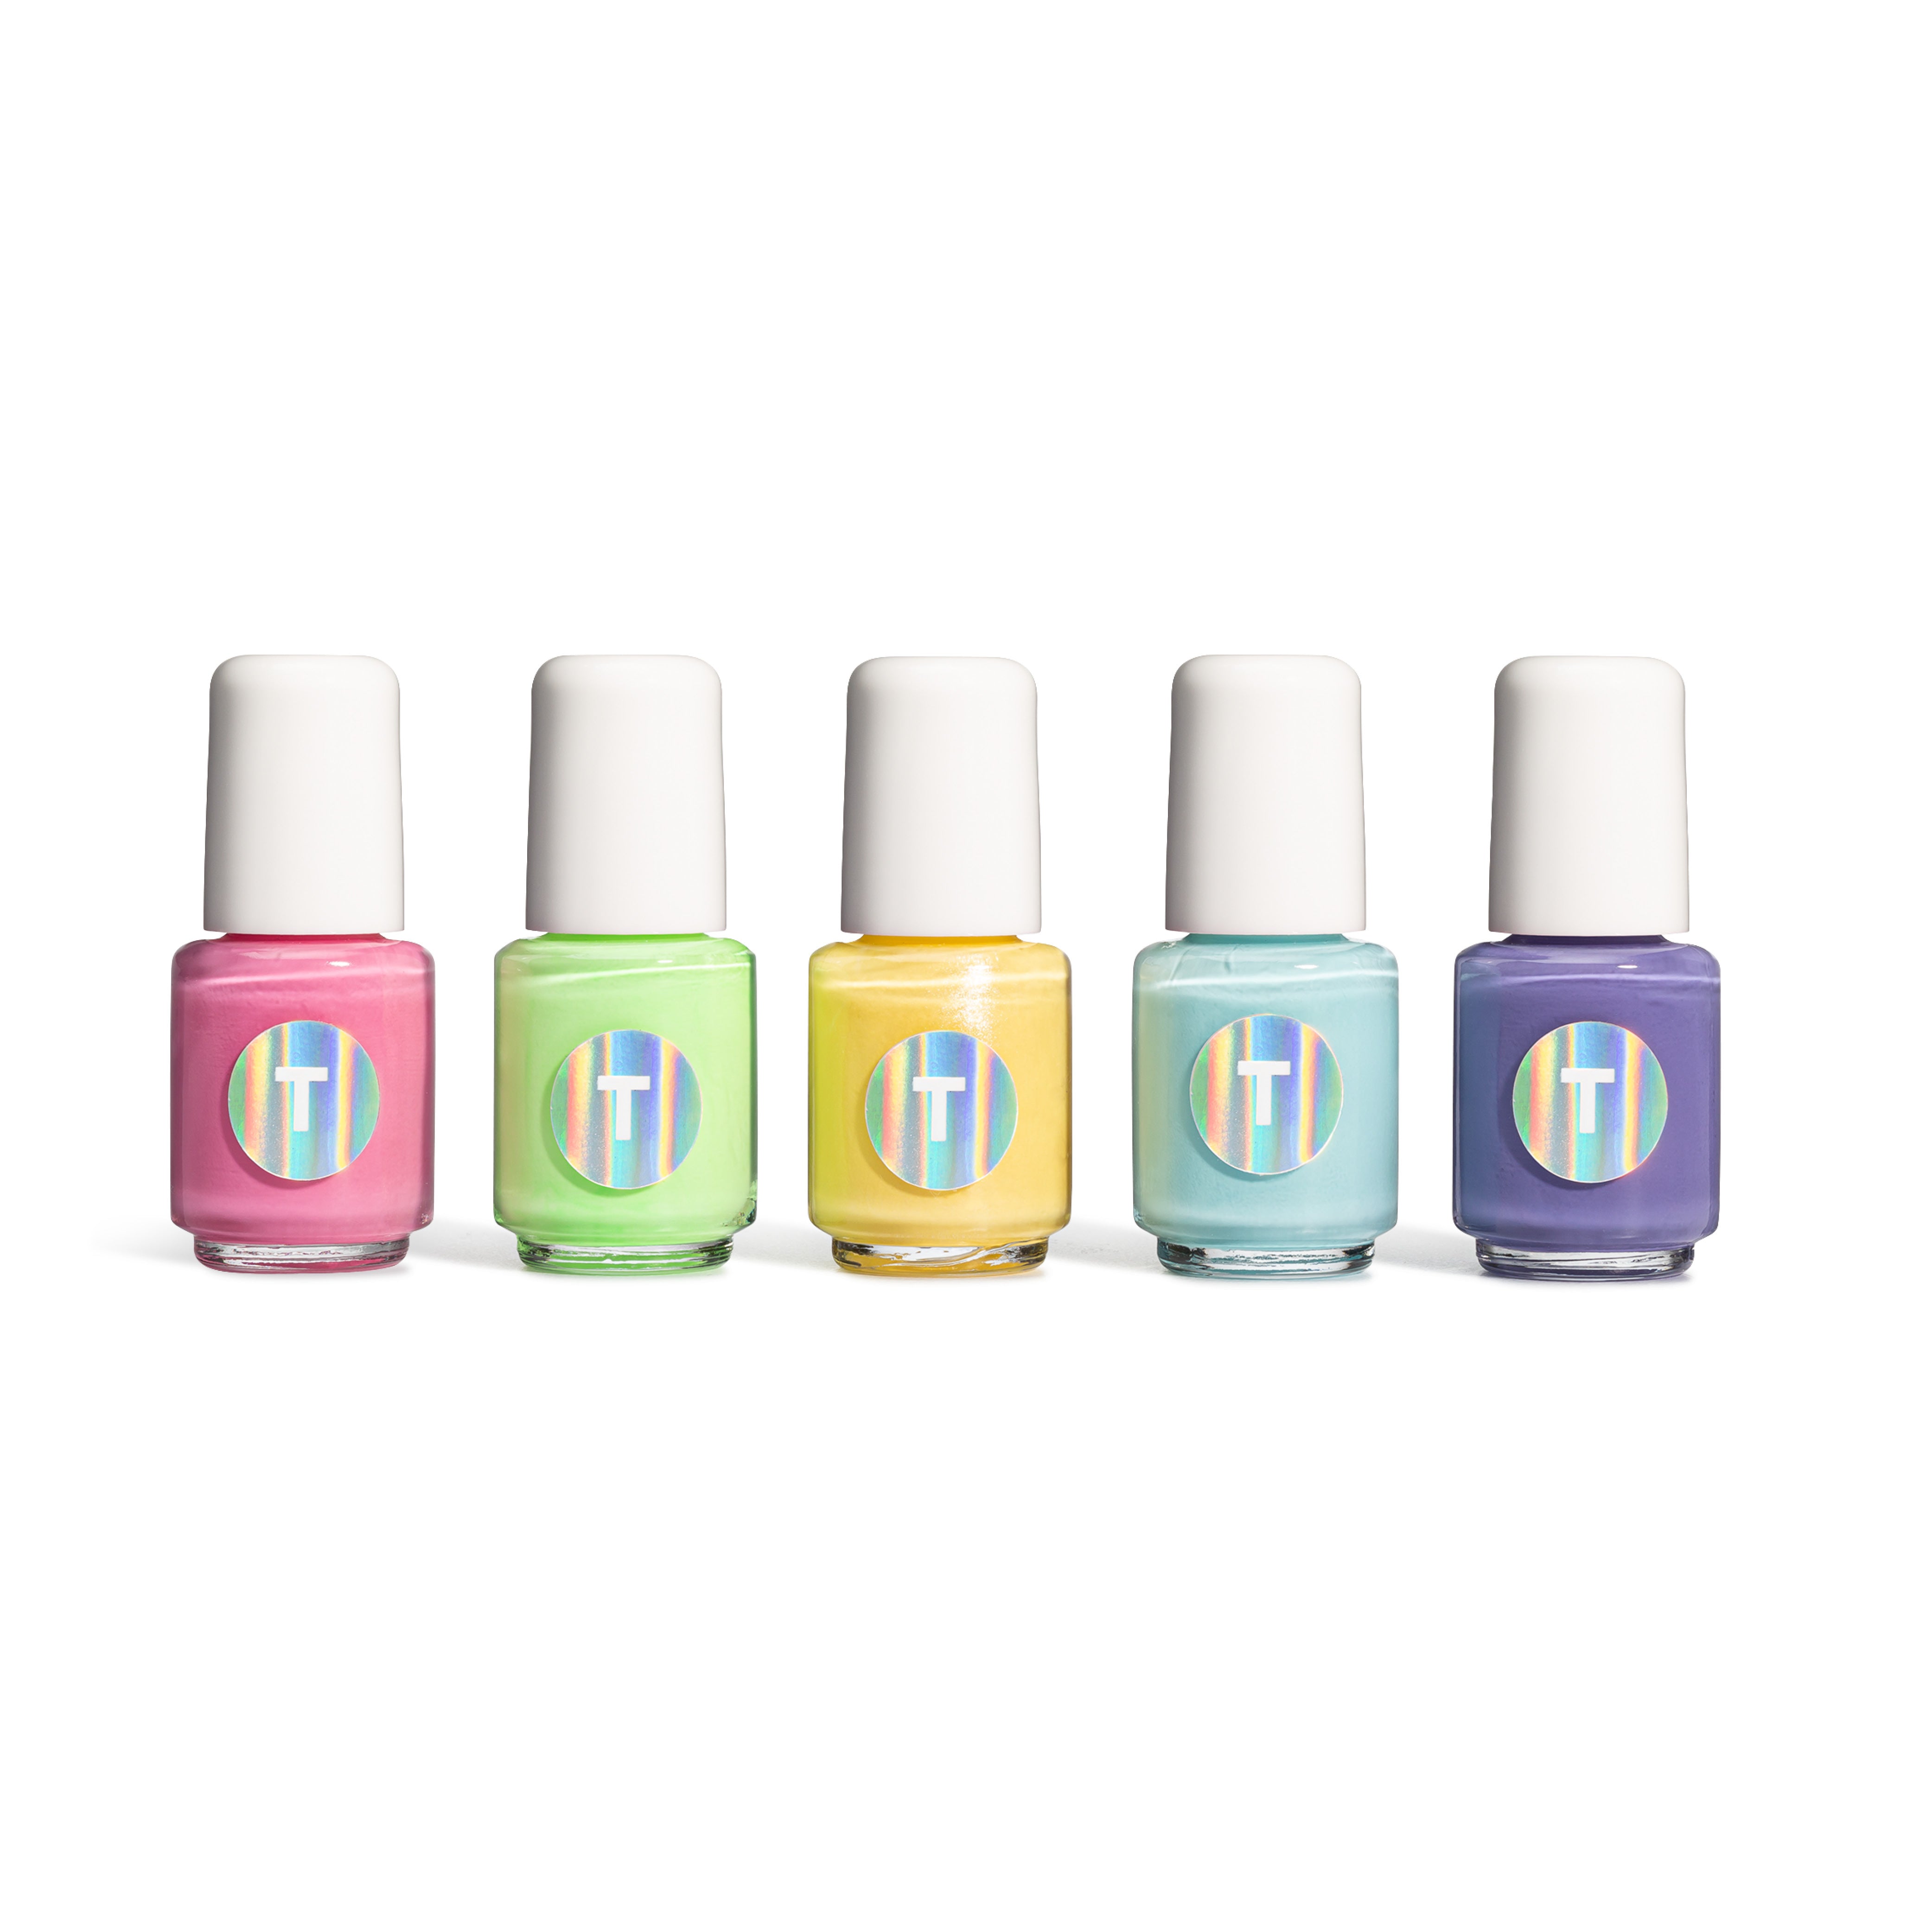 Buy YBN Nail Art kit for Girls Birthday Gift for Girls Little Girls, Kids  Pretend Play (Random Cute Nail Designs)- Multicolor Online at Low Prices in  India - Amazon.in